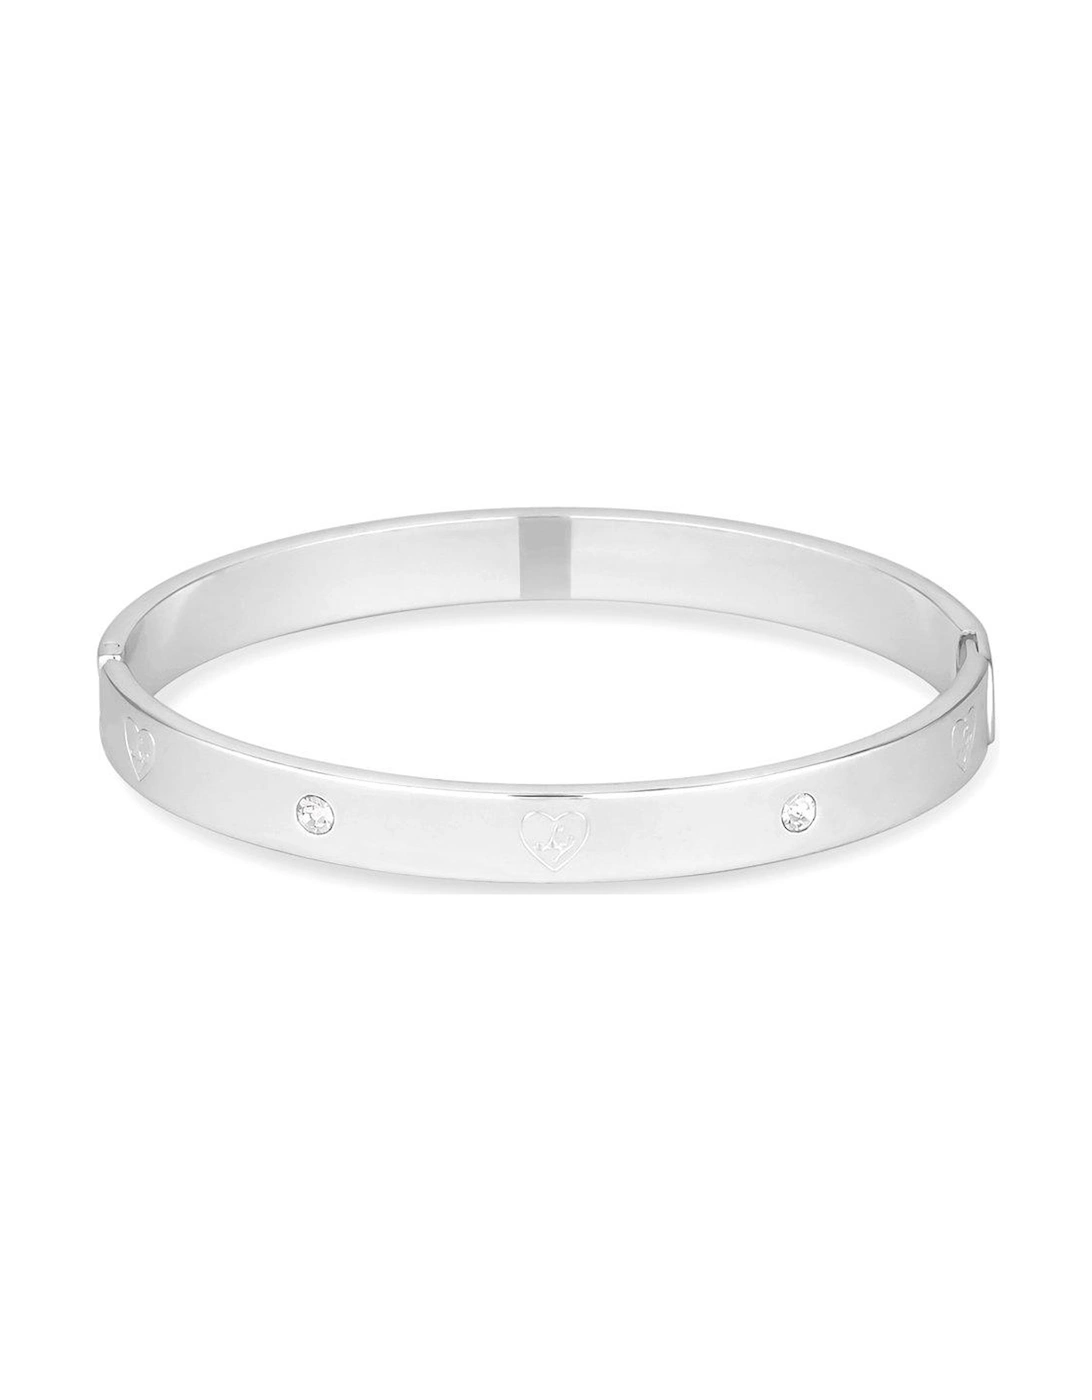 SILVER PLATED HEART BANGLE - GIFT BOXED